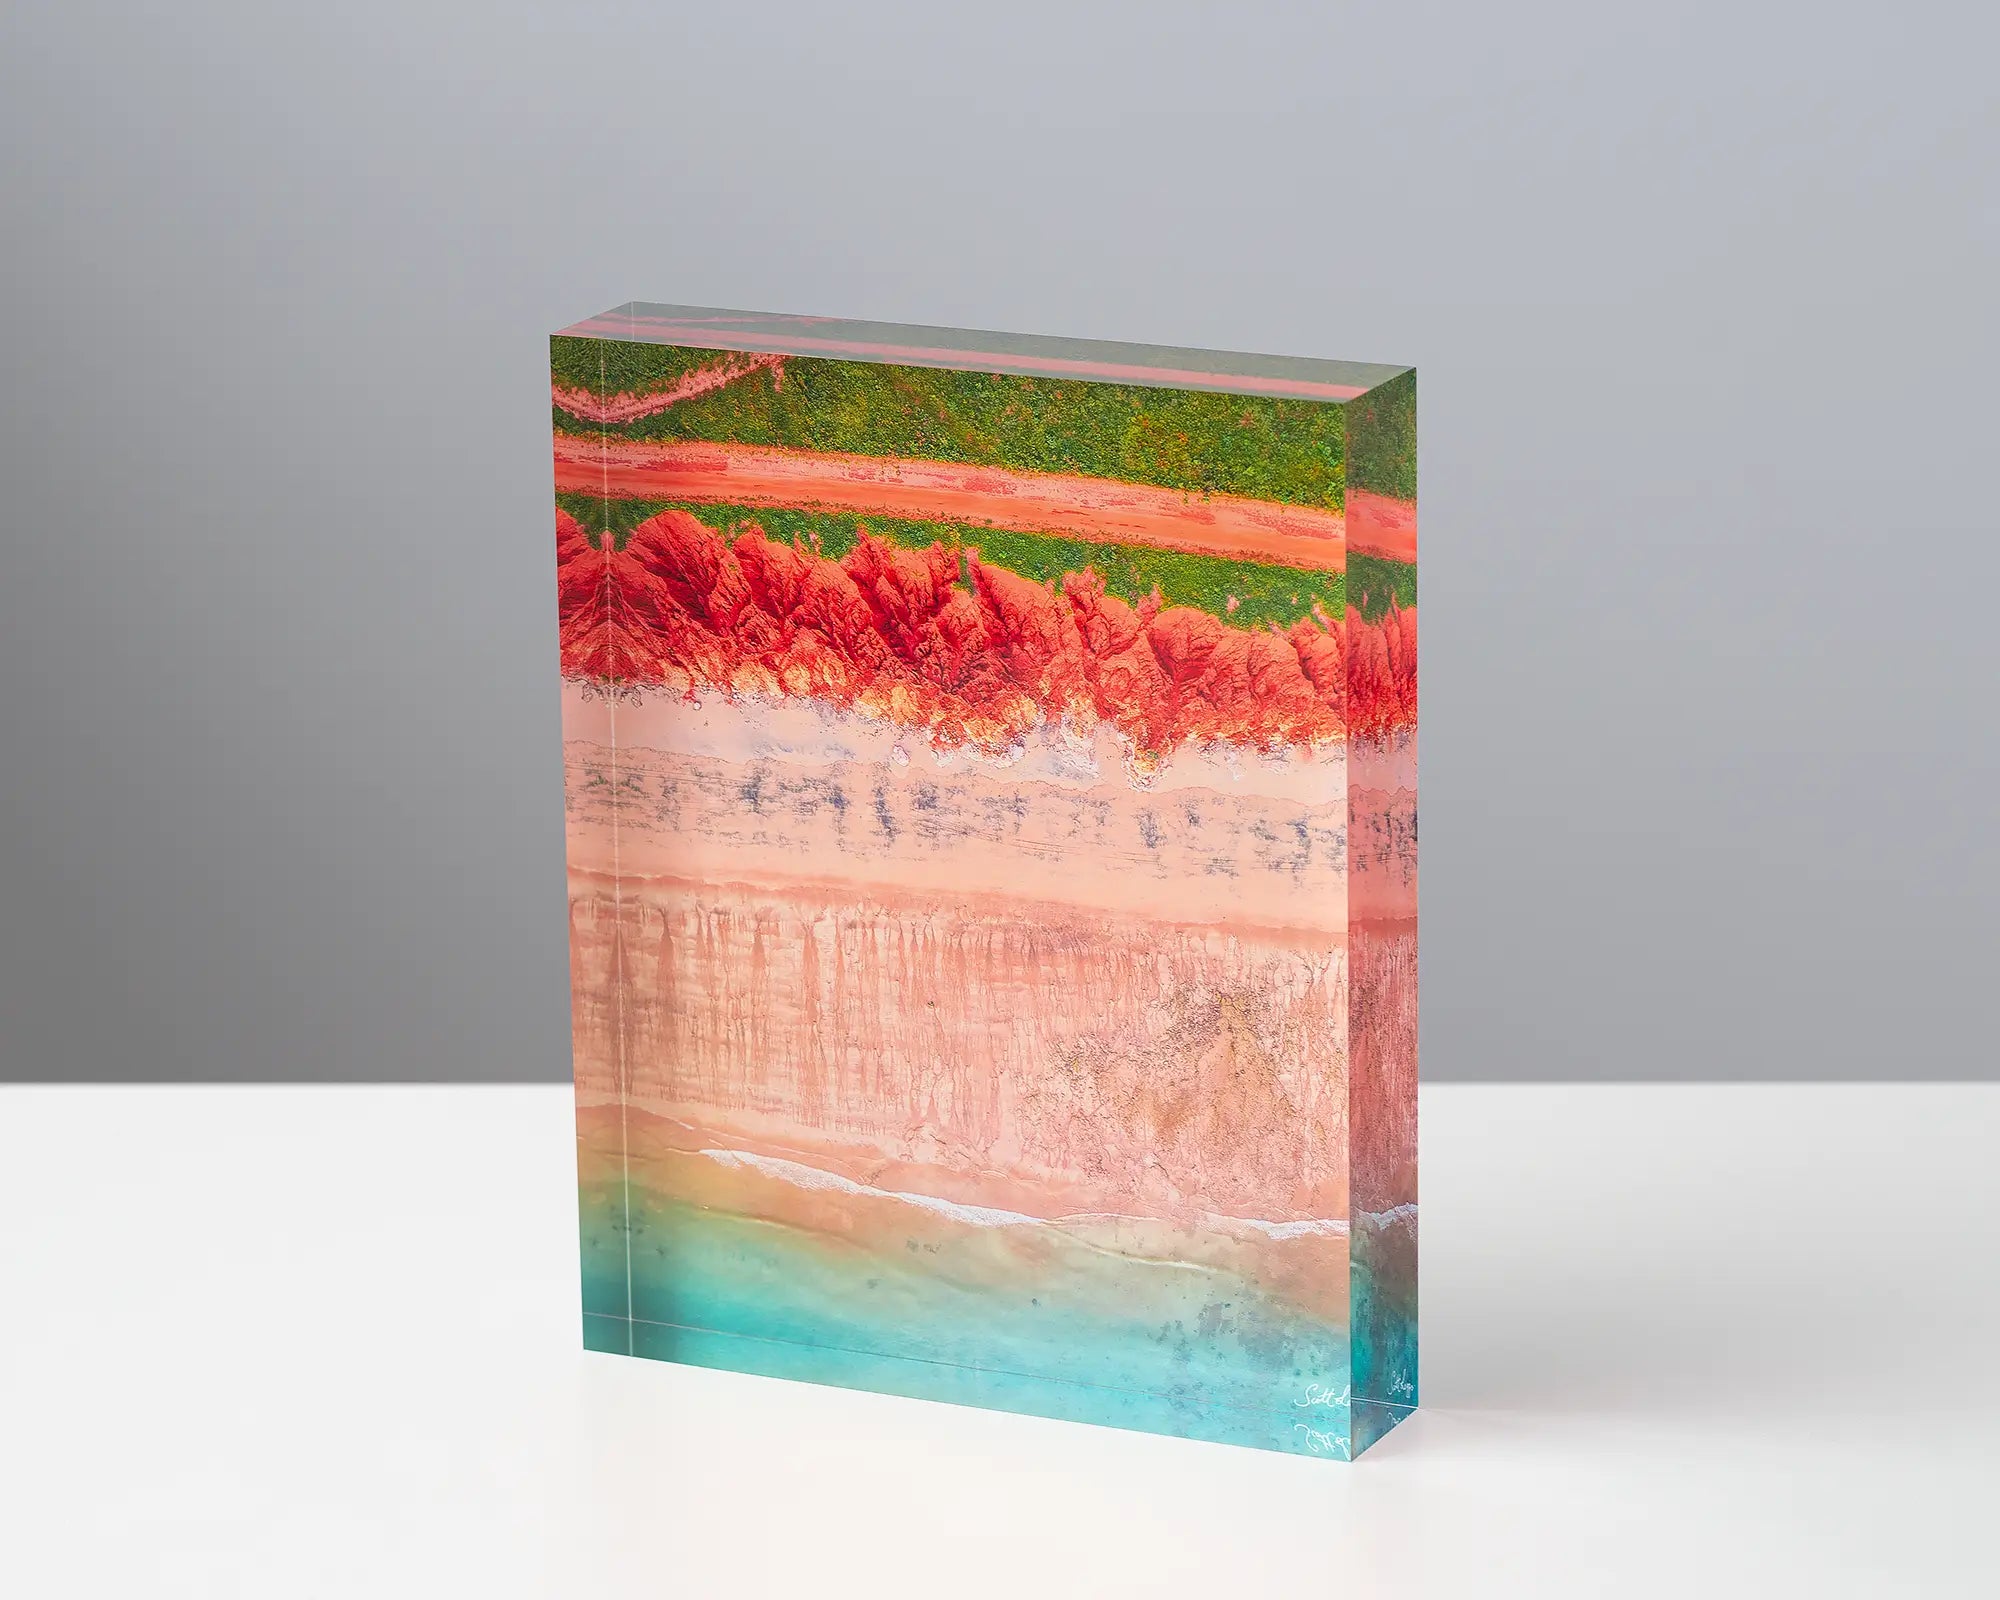 Coloured acrylic block. James Price Point, The Kimberley, aerial artwork sitting on desk.